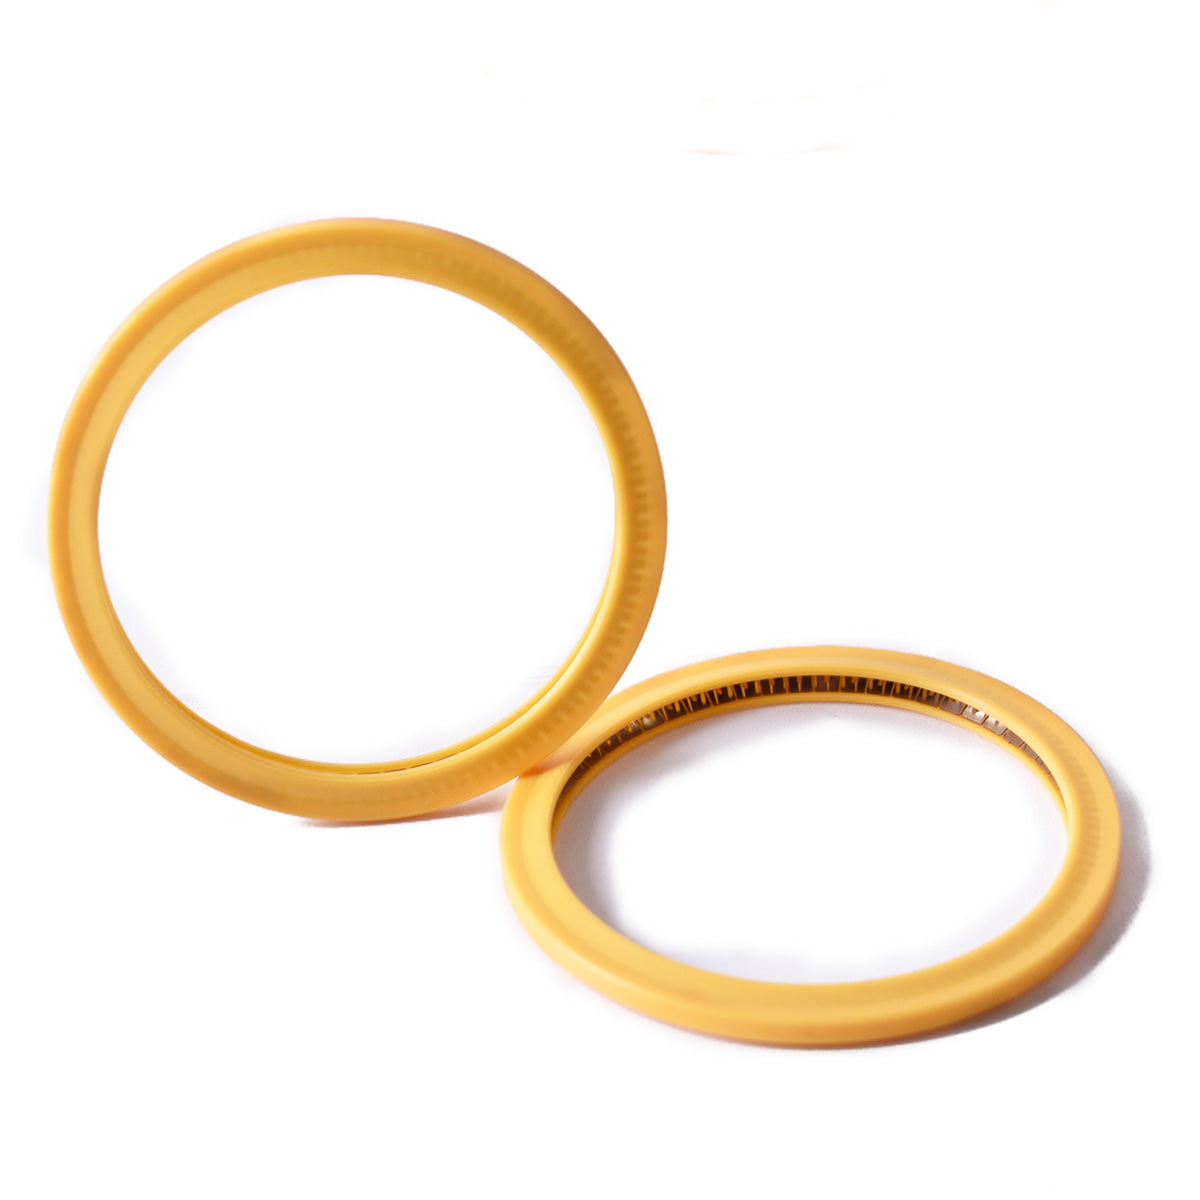 Rubber Seal Ring 32 x 24 x 3.6 x 2.7 for Raytools or Precitec Laser Head